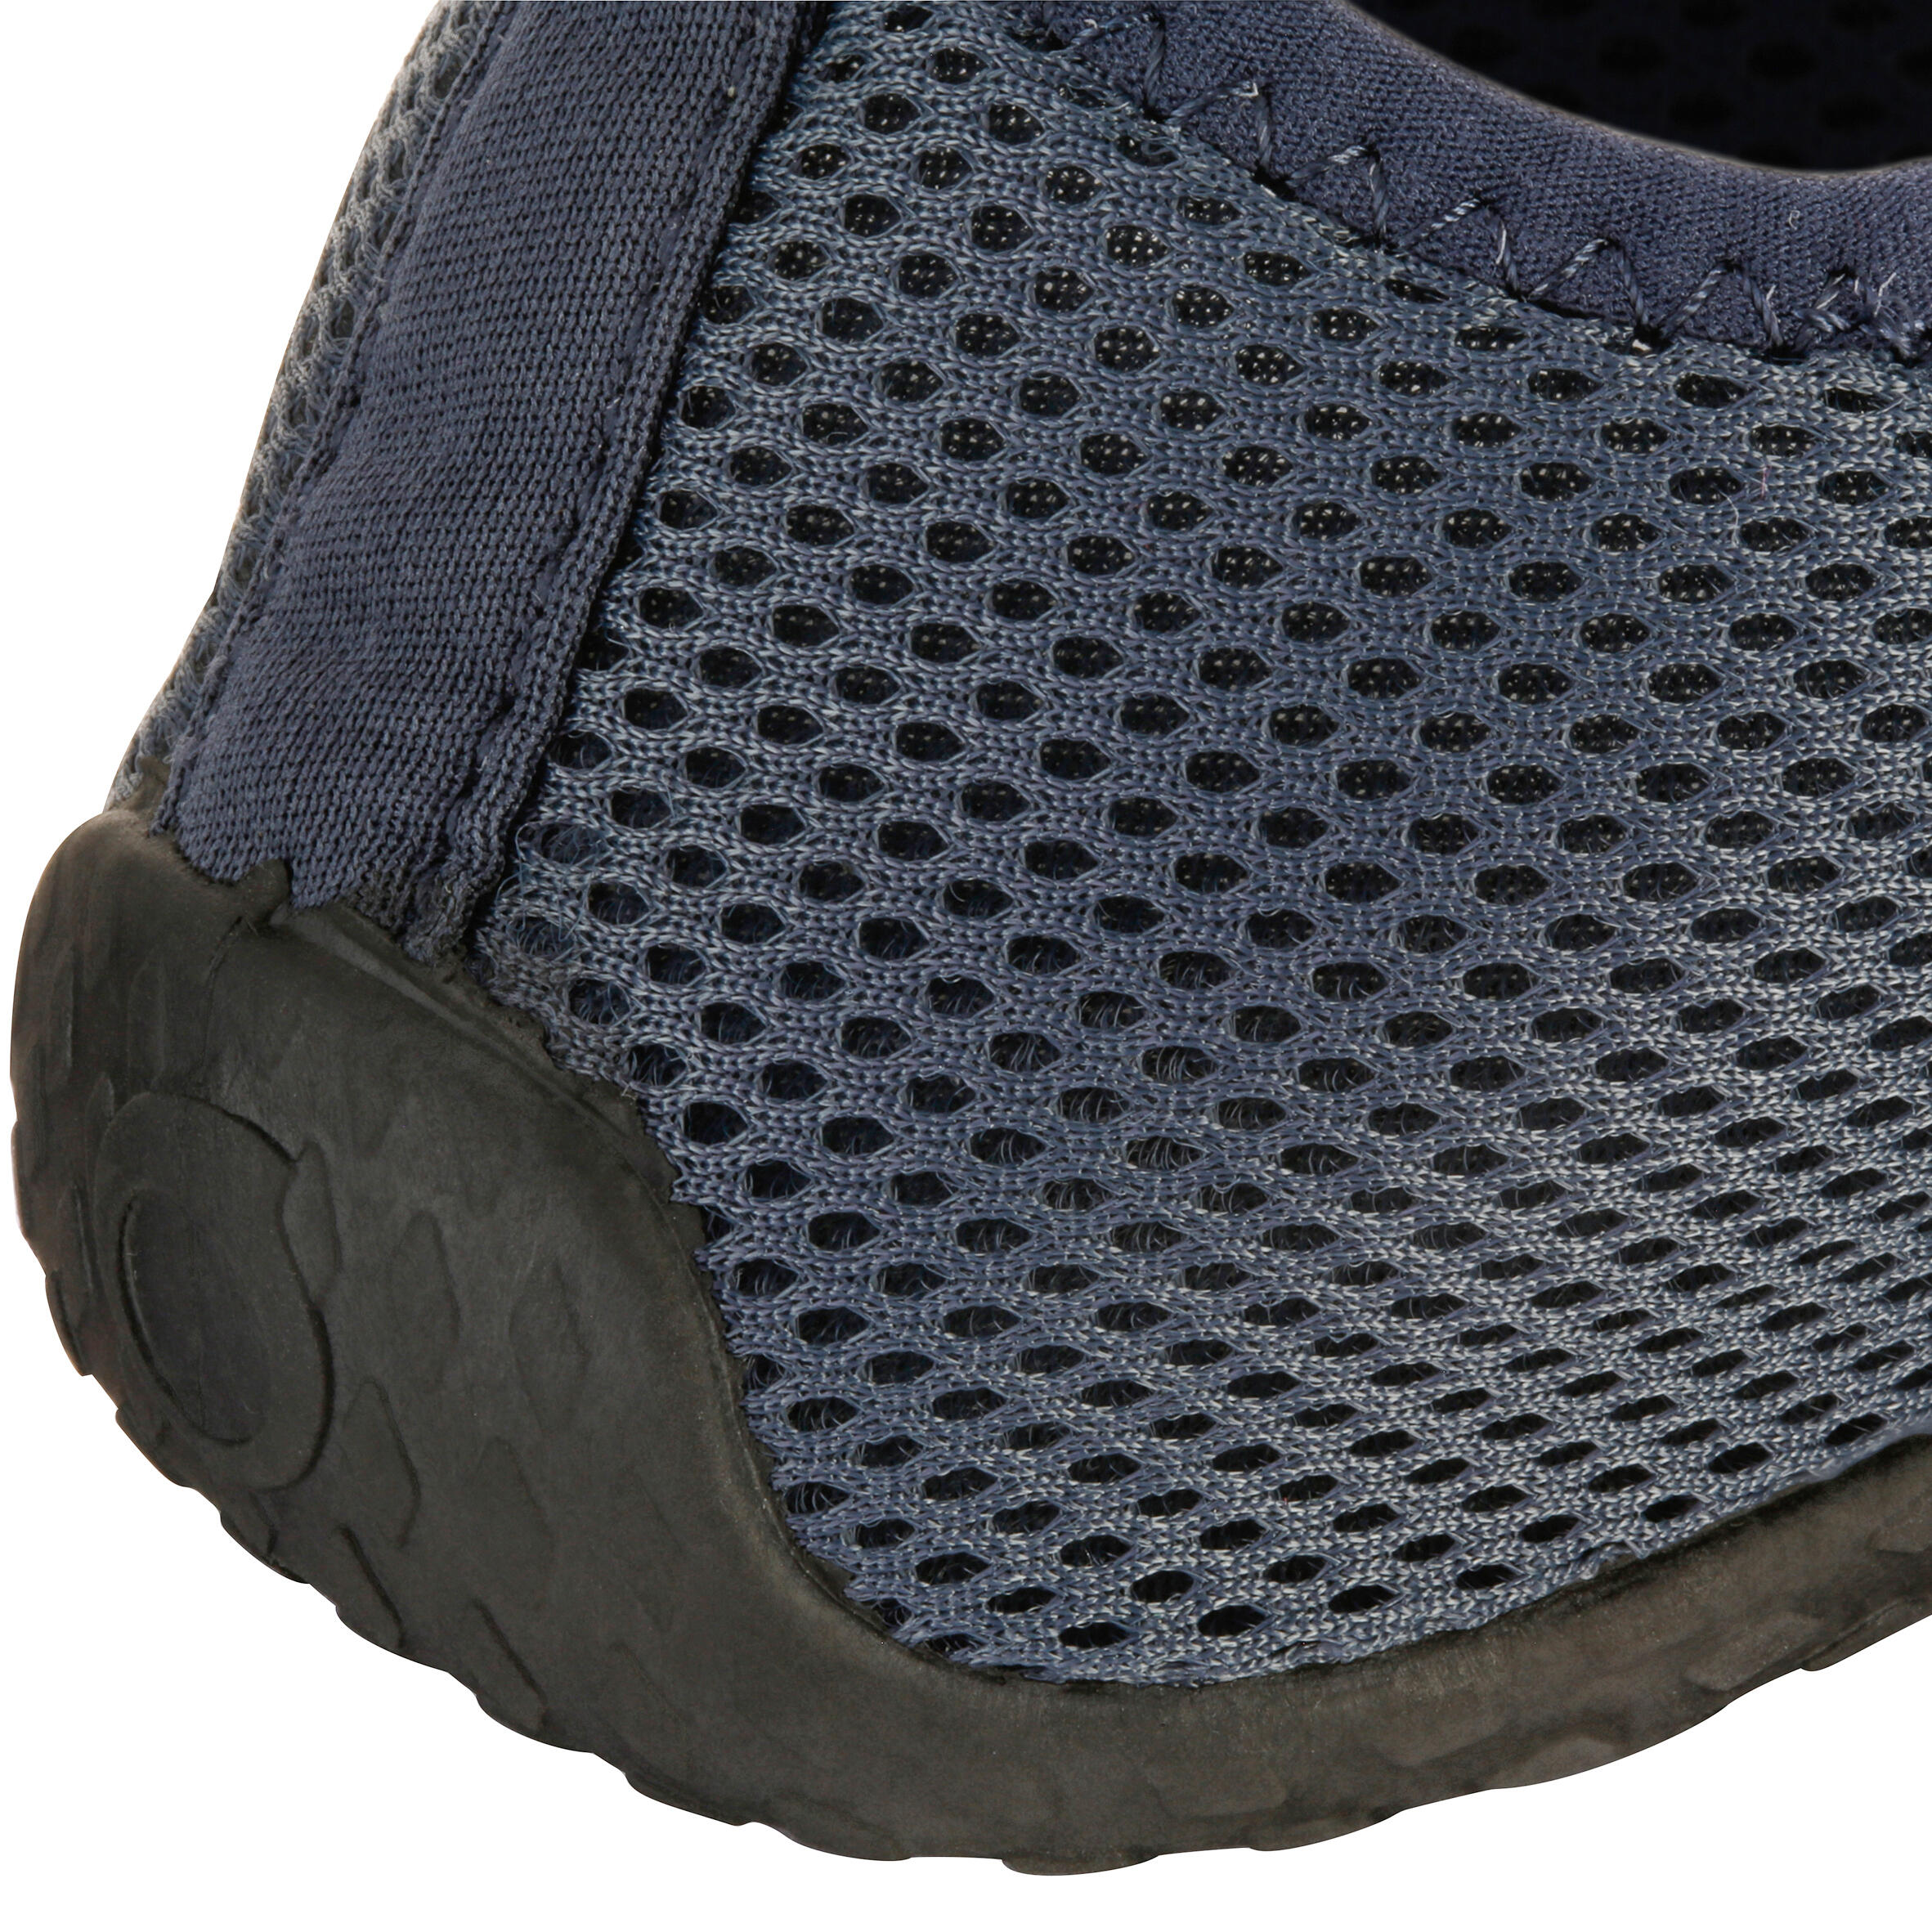 decathlon water shoes